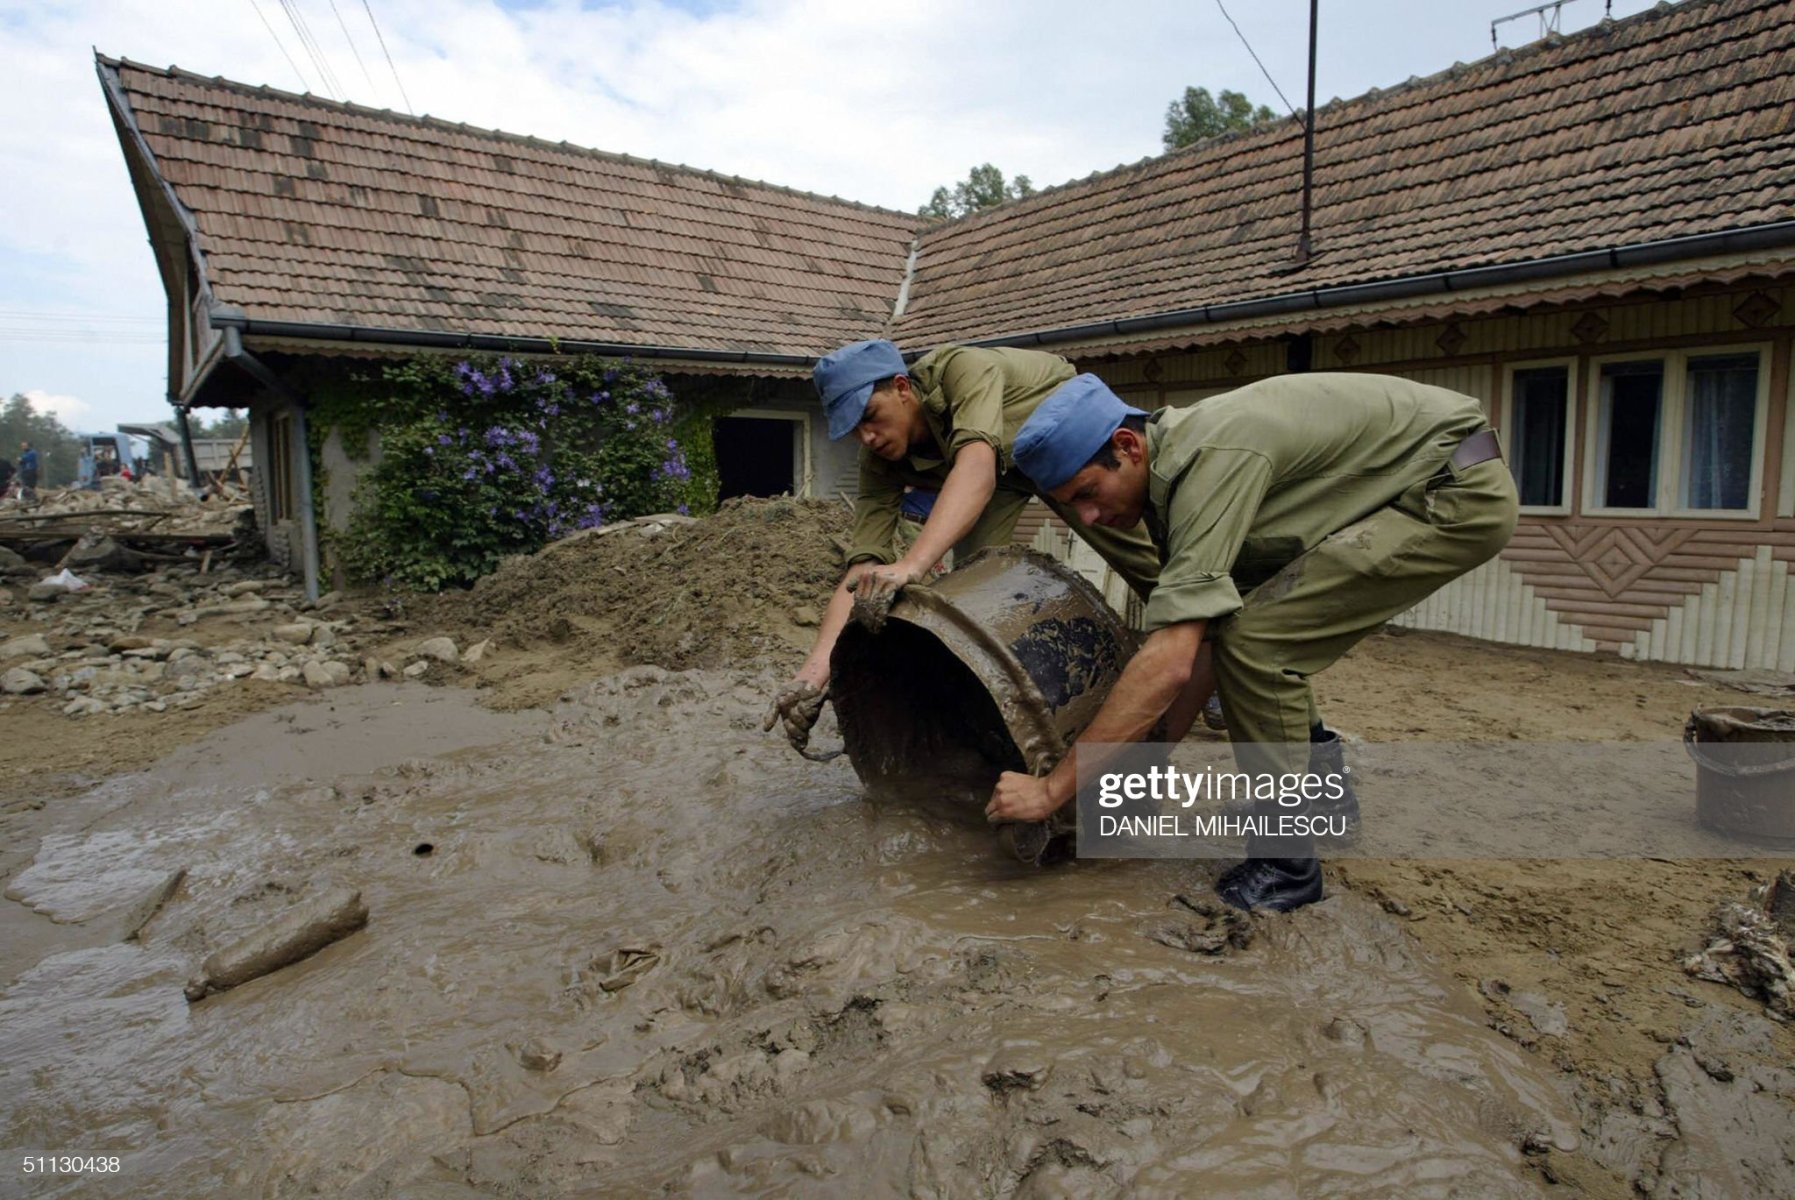 BACAU, ROMANIA:  Romanian soldiers start the clearing up process by carrying mud from inside a house in the village of Agas some 300 km west of Bucharest, 30 July 2004. Three people were killed and about 2,000 left stranded by major flooding that cut off roads and railway lines in northern and central Romania, the environment ministry said Thursday. Officials said about 50 bridges and numerous dams were destroyed by the floods, as waters continued to rise. They said more than 2,000 houses were damaged and thousands of residents deprived of electricity.  AFP PHOTO DANIEL MIHAILESCU  (Photo credit should read DANIEL MIHAILESCU/AFP via Getty Images)